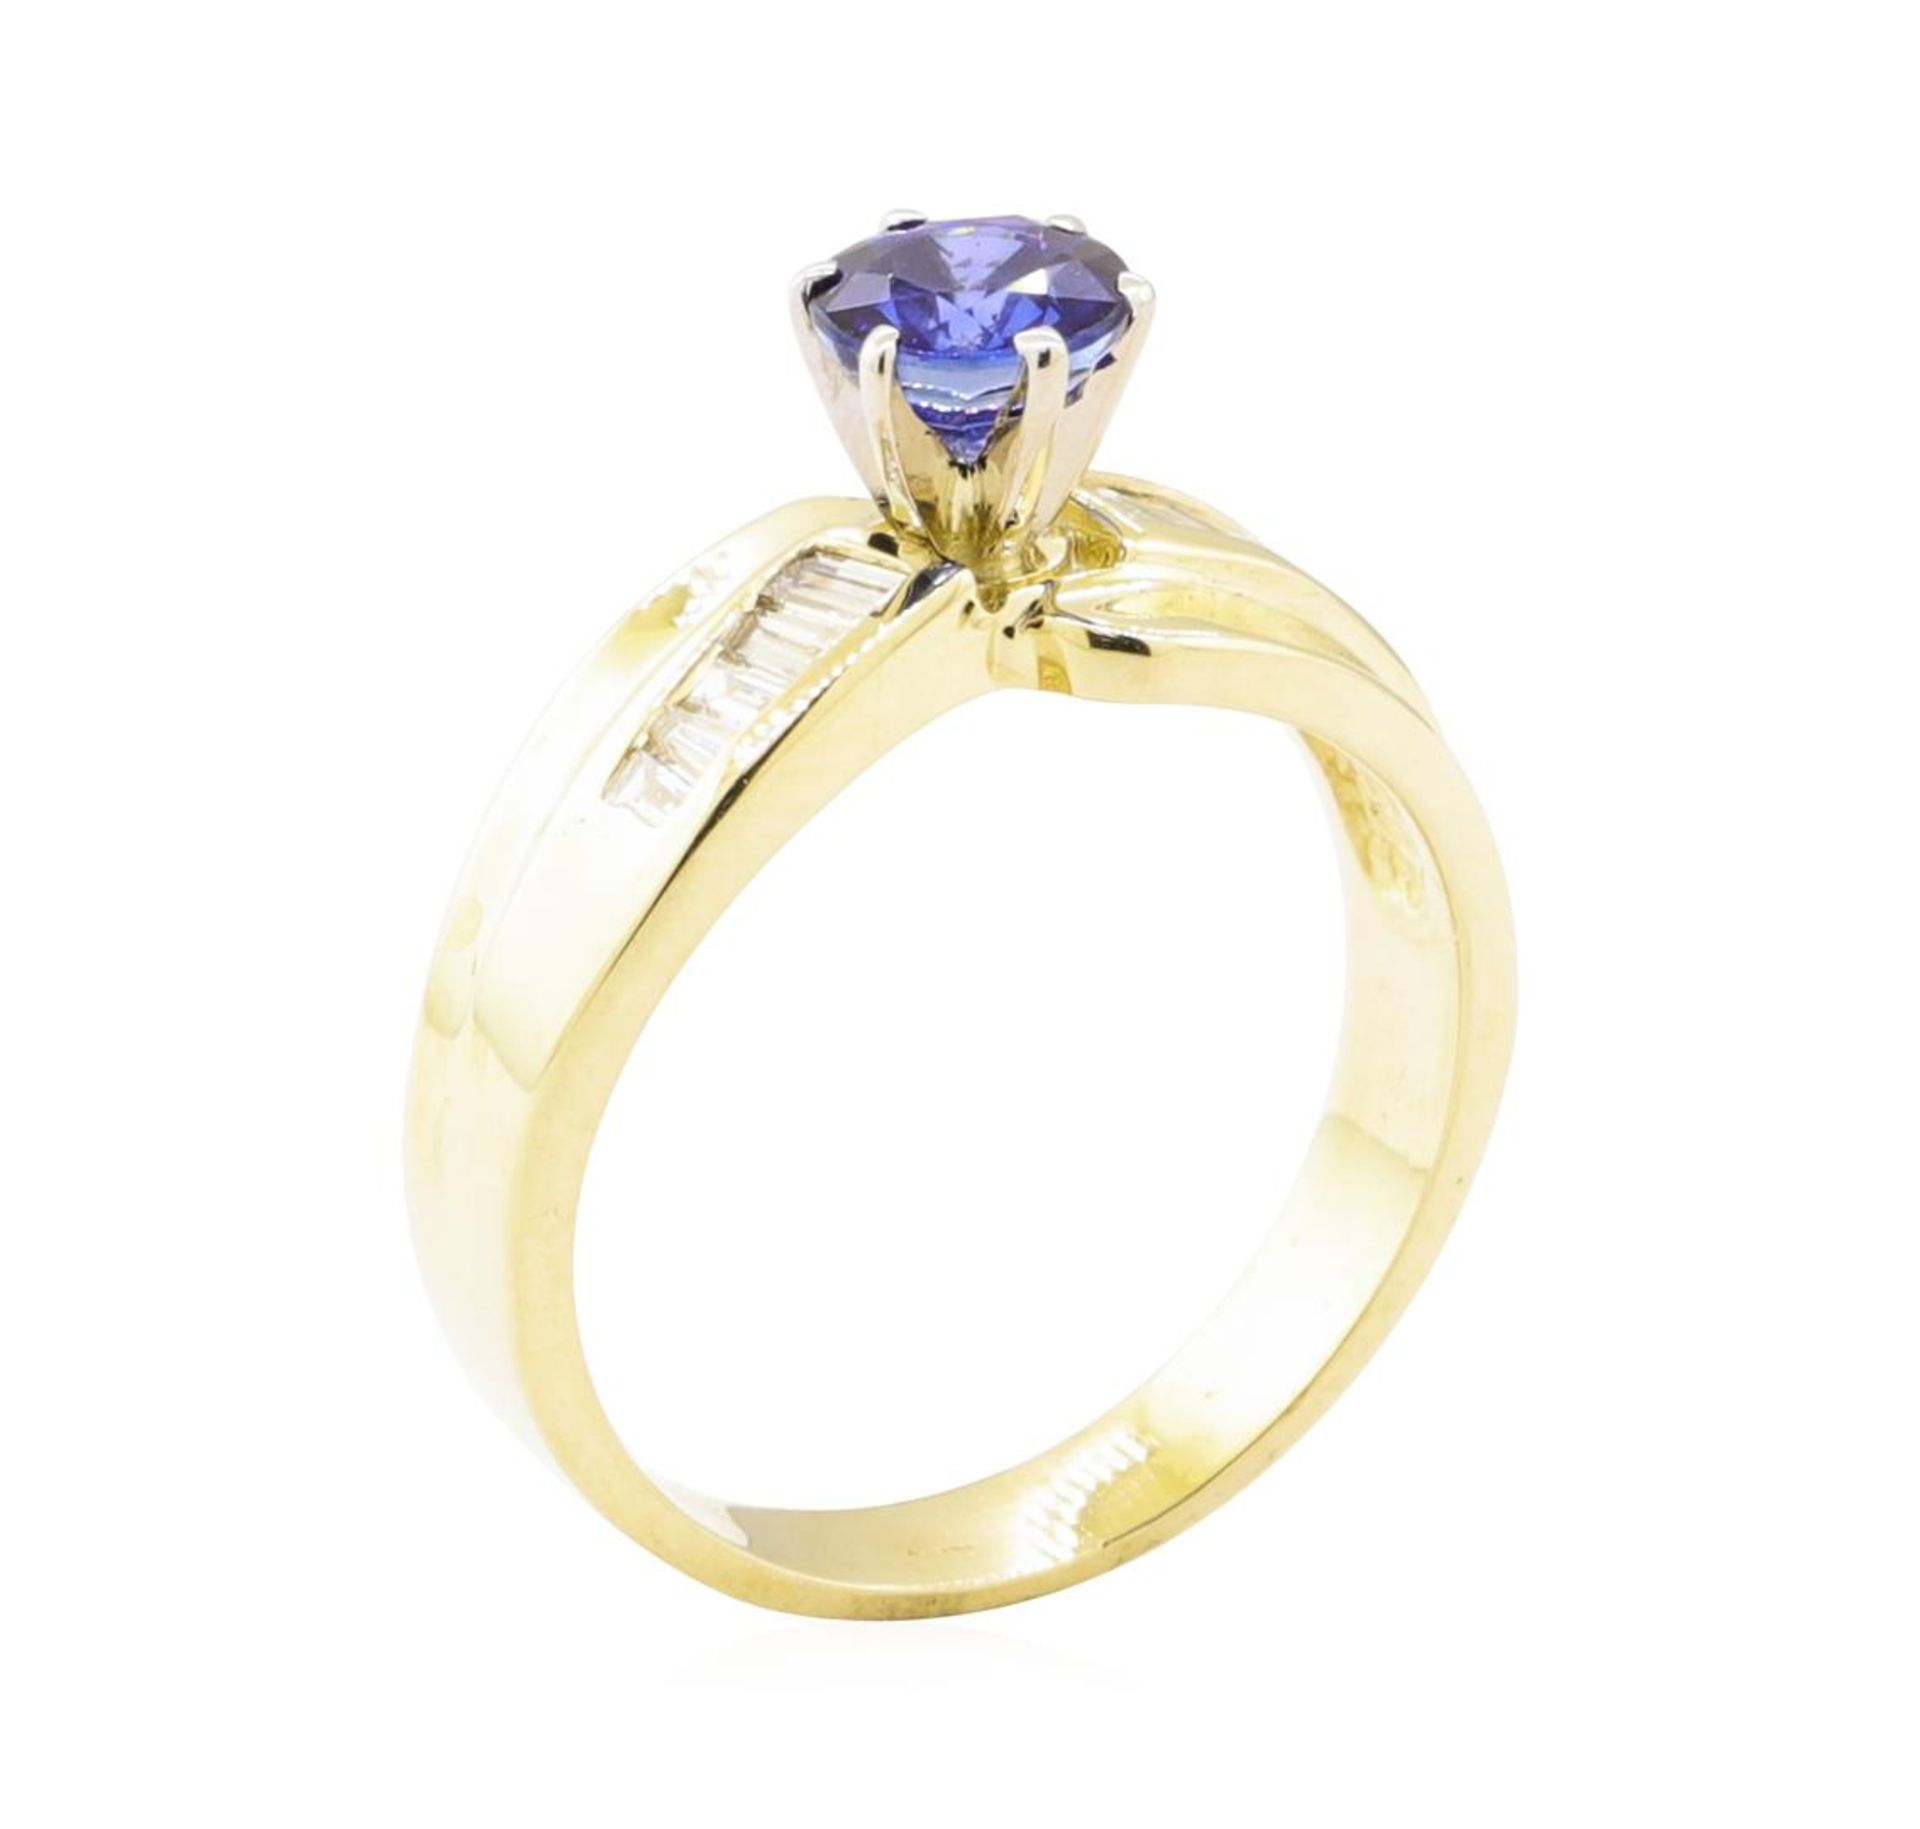 1.32ctw Blue Sapphire and Diamond Ring - 14KT Yellow Gold - Image 4 of 4